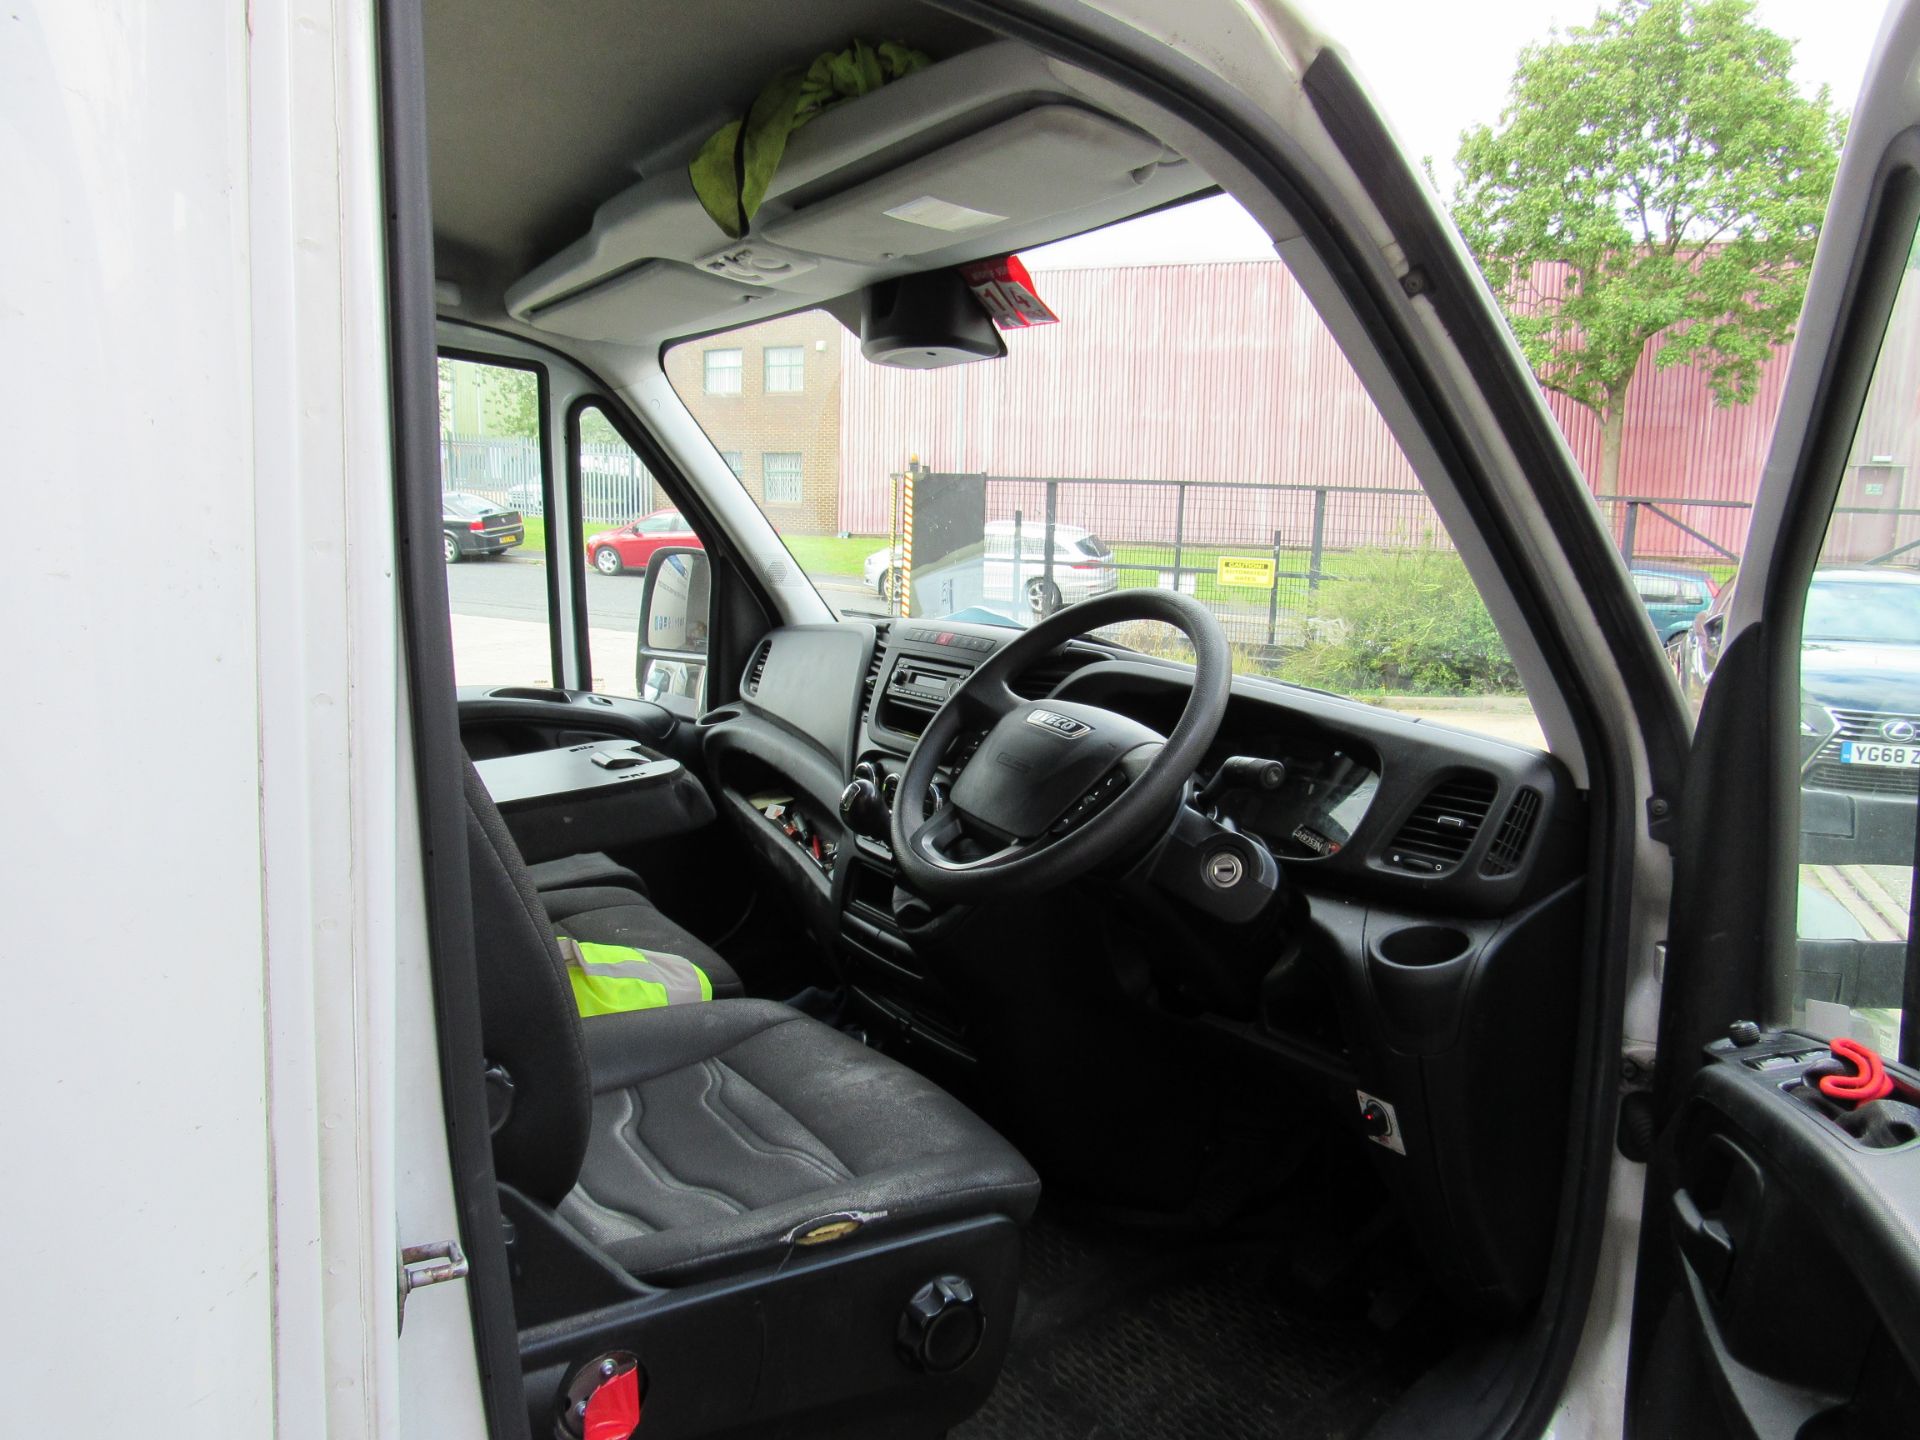 Iveco Daily 35 C15 Luton Van, Registration E5 YCE, - Image 12 of 13